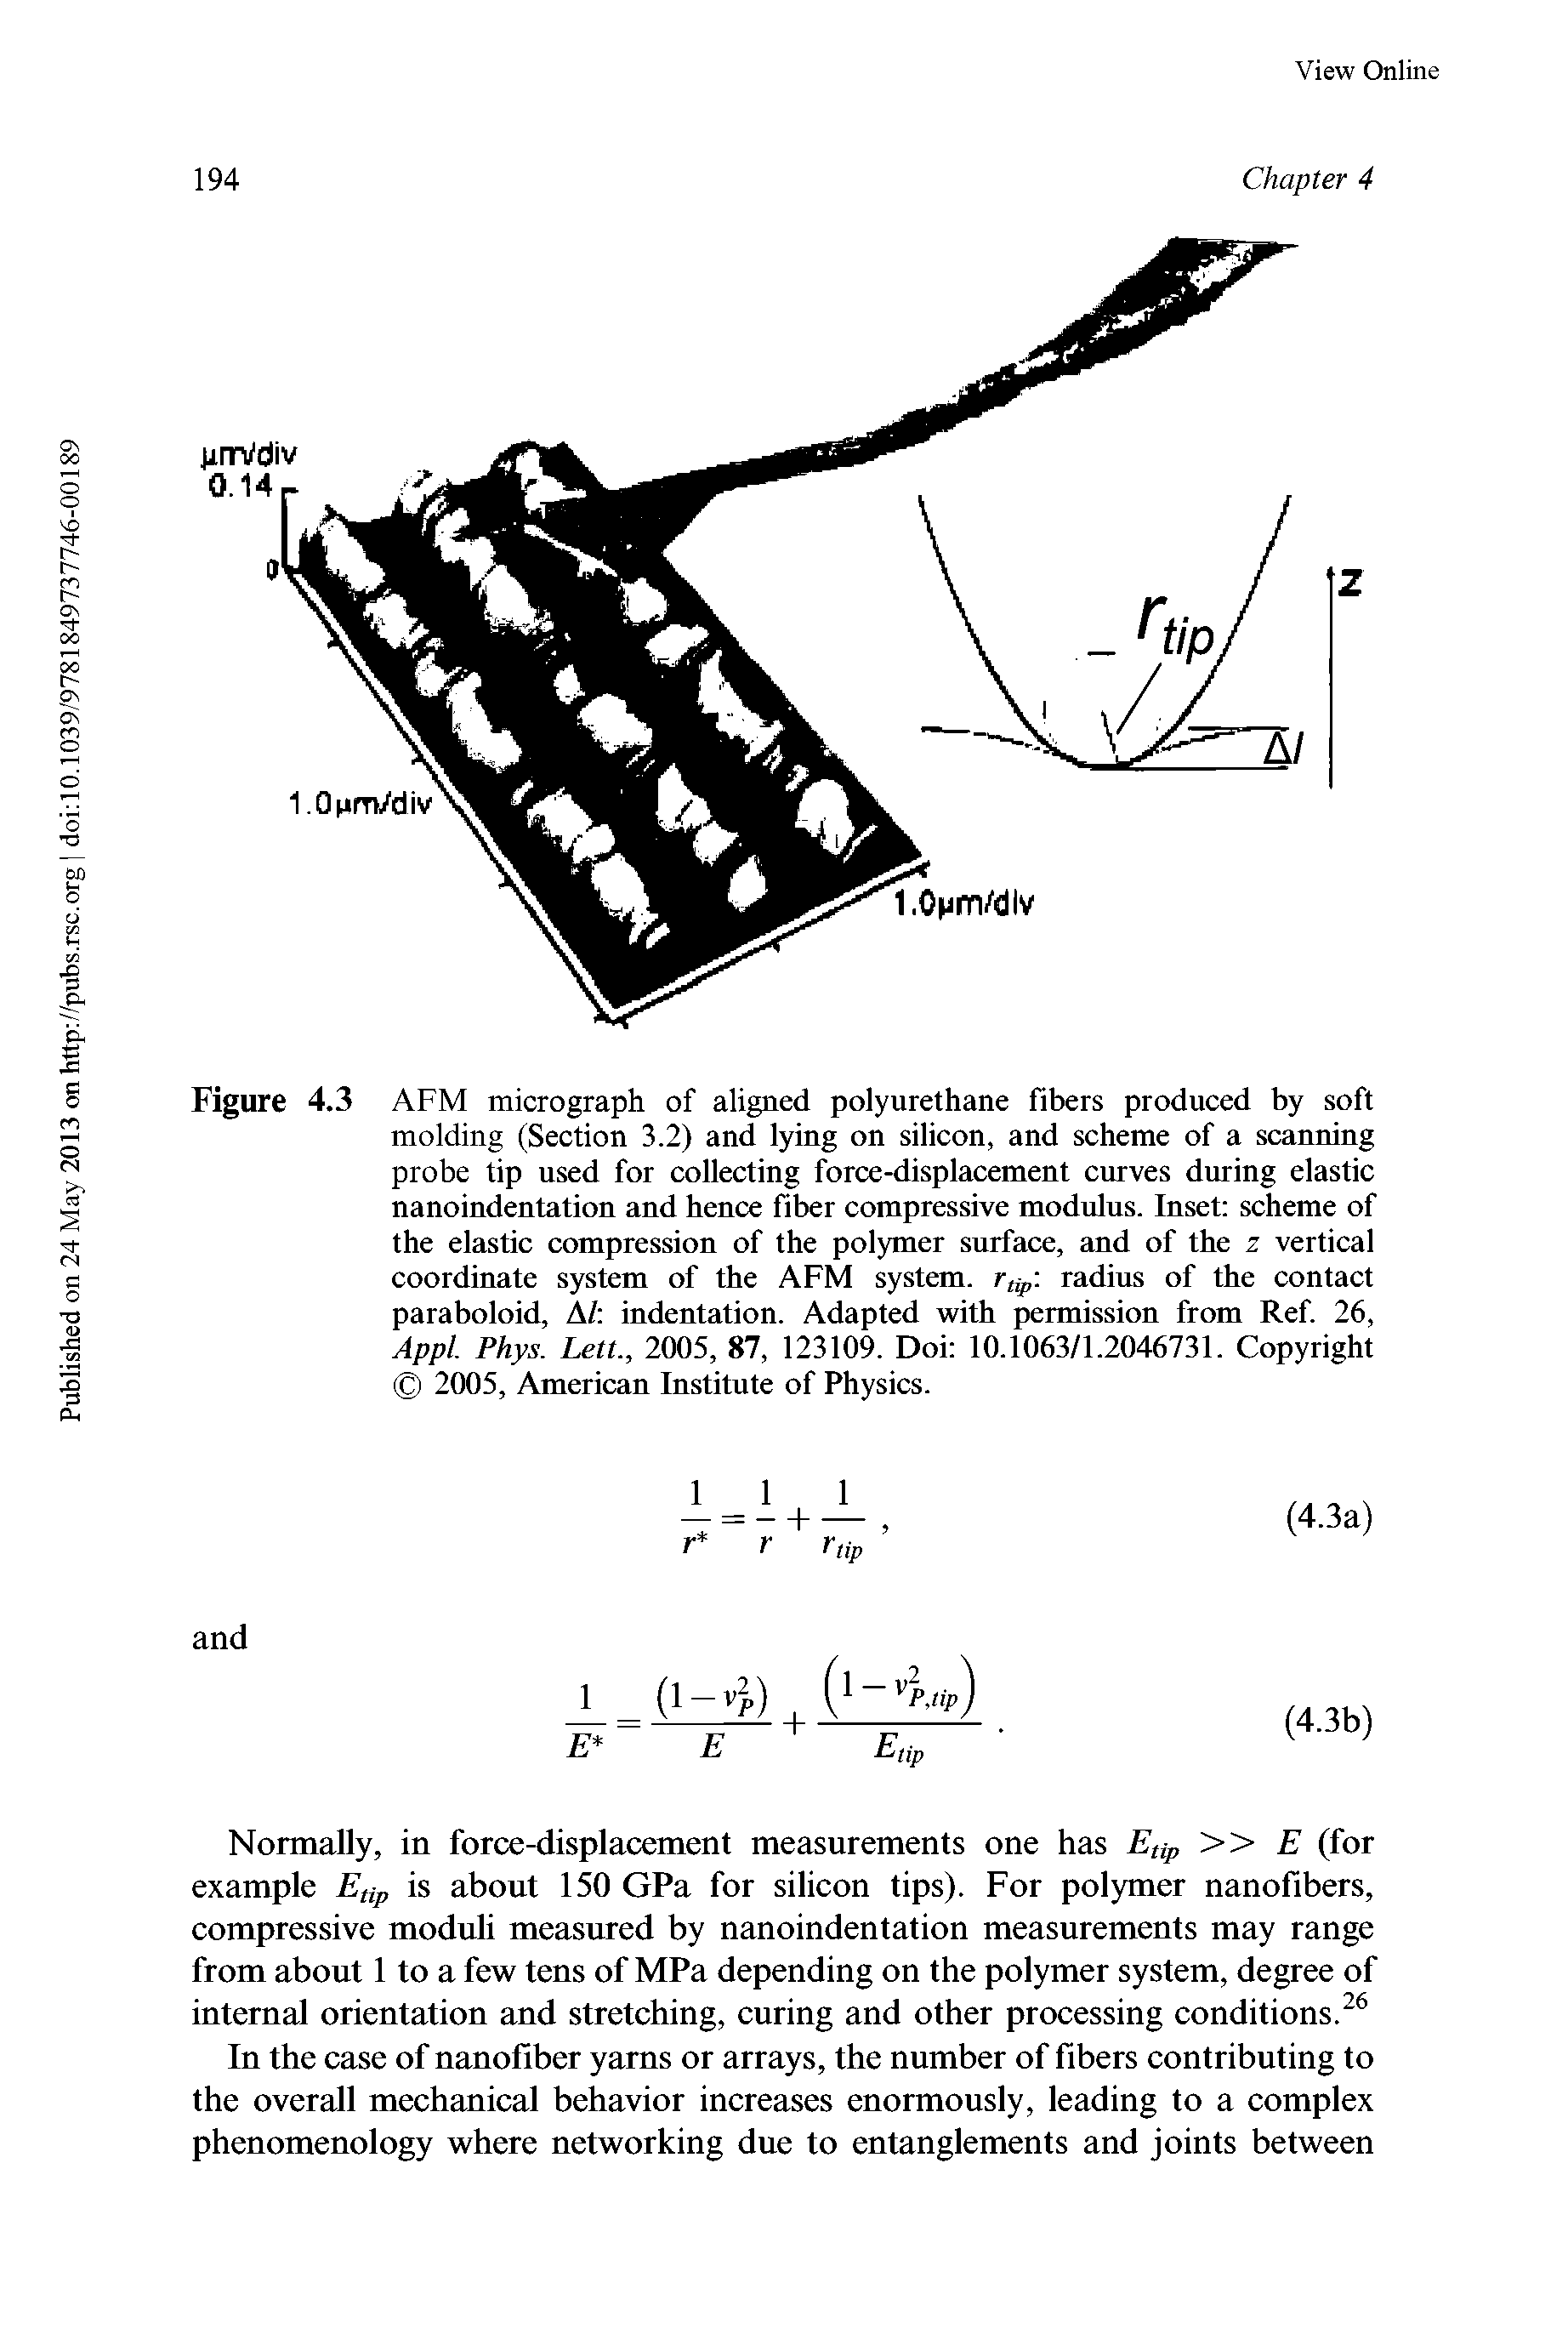 Figure 4.3 AFM micrograph of aligned polyurethane fibers produced by soft molding (Section 3.2) and lying on silicon, and scheme of a scanning probe tip used for collecting force-displacement curves during elastic nanoindentation and hence fiber compressive modulus. Inset scheme of the elastic compression of the polymer surface, and of the z vertical coordinate system of the AFM system, radius of the contact paraboloid, A/ indentation. Adapted with permission from Ref 26, Appl. Phys. Lett., 2005, 87, 123109. Doi 10.1063/1.2046731. Copyright 2005, American Institute of Physics.